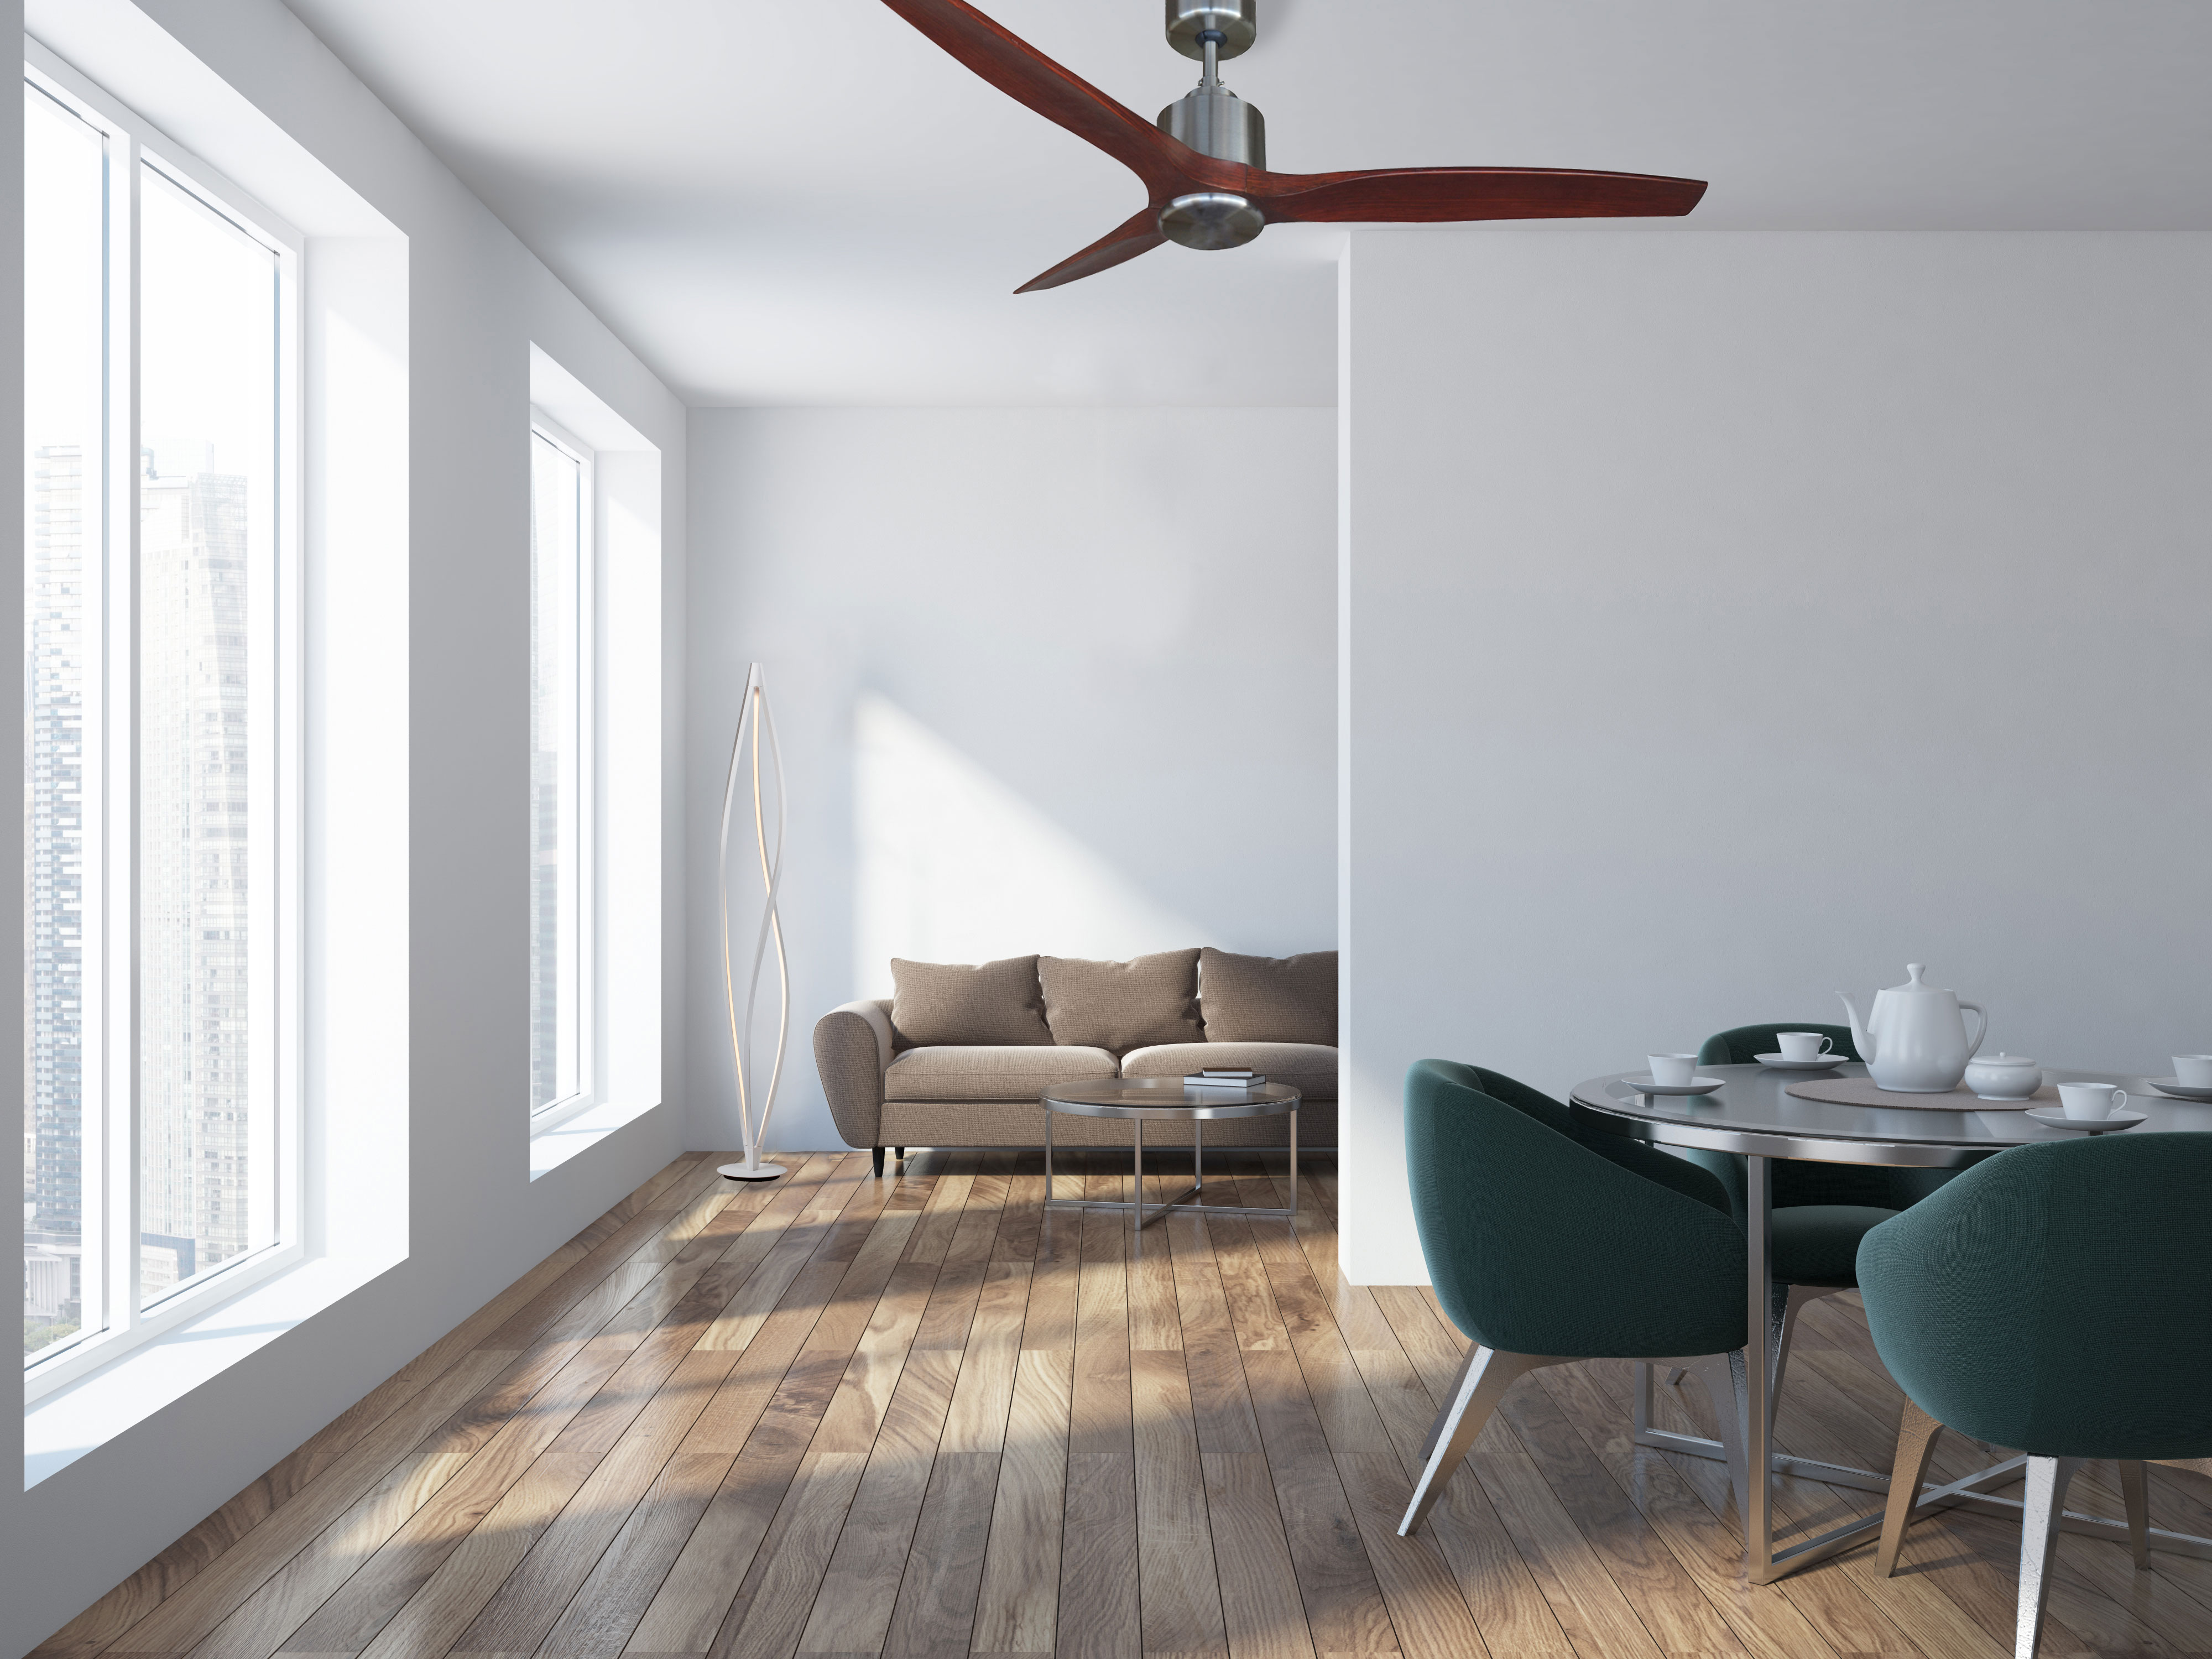 Ceiling Fans 7 Tips For Choosing The Perfect Ceiling Fan Eurolux